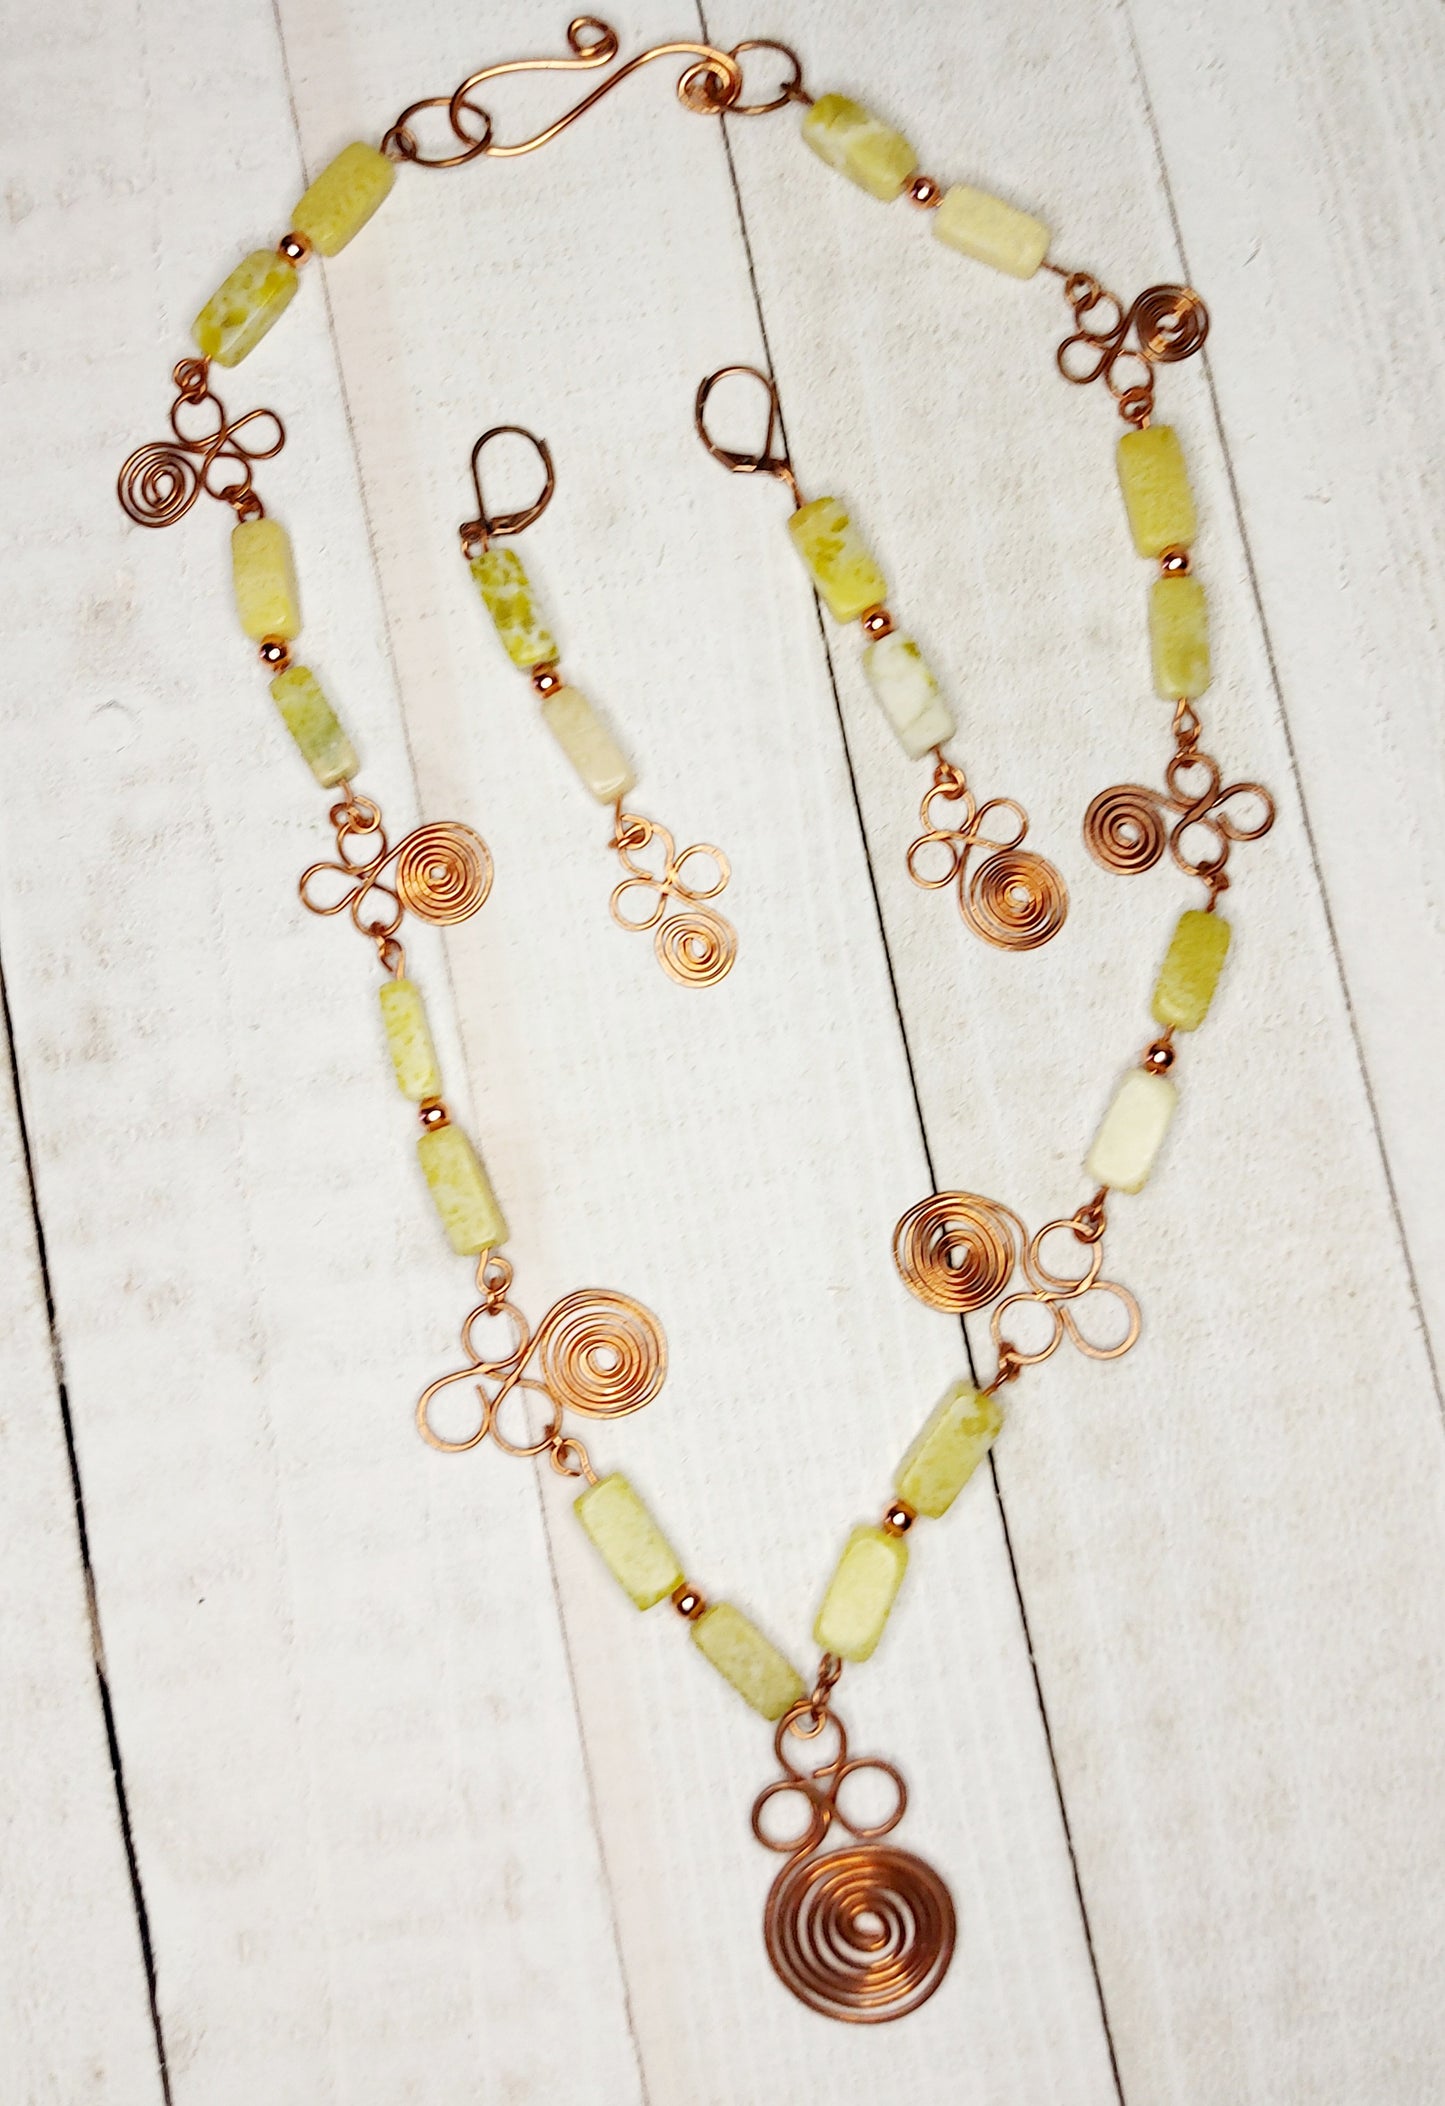 New Jade Copper Coiled Pendant Necklace Set